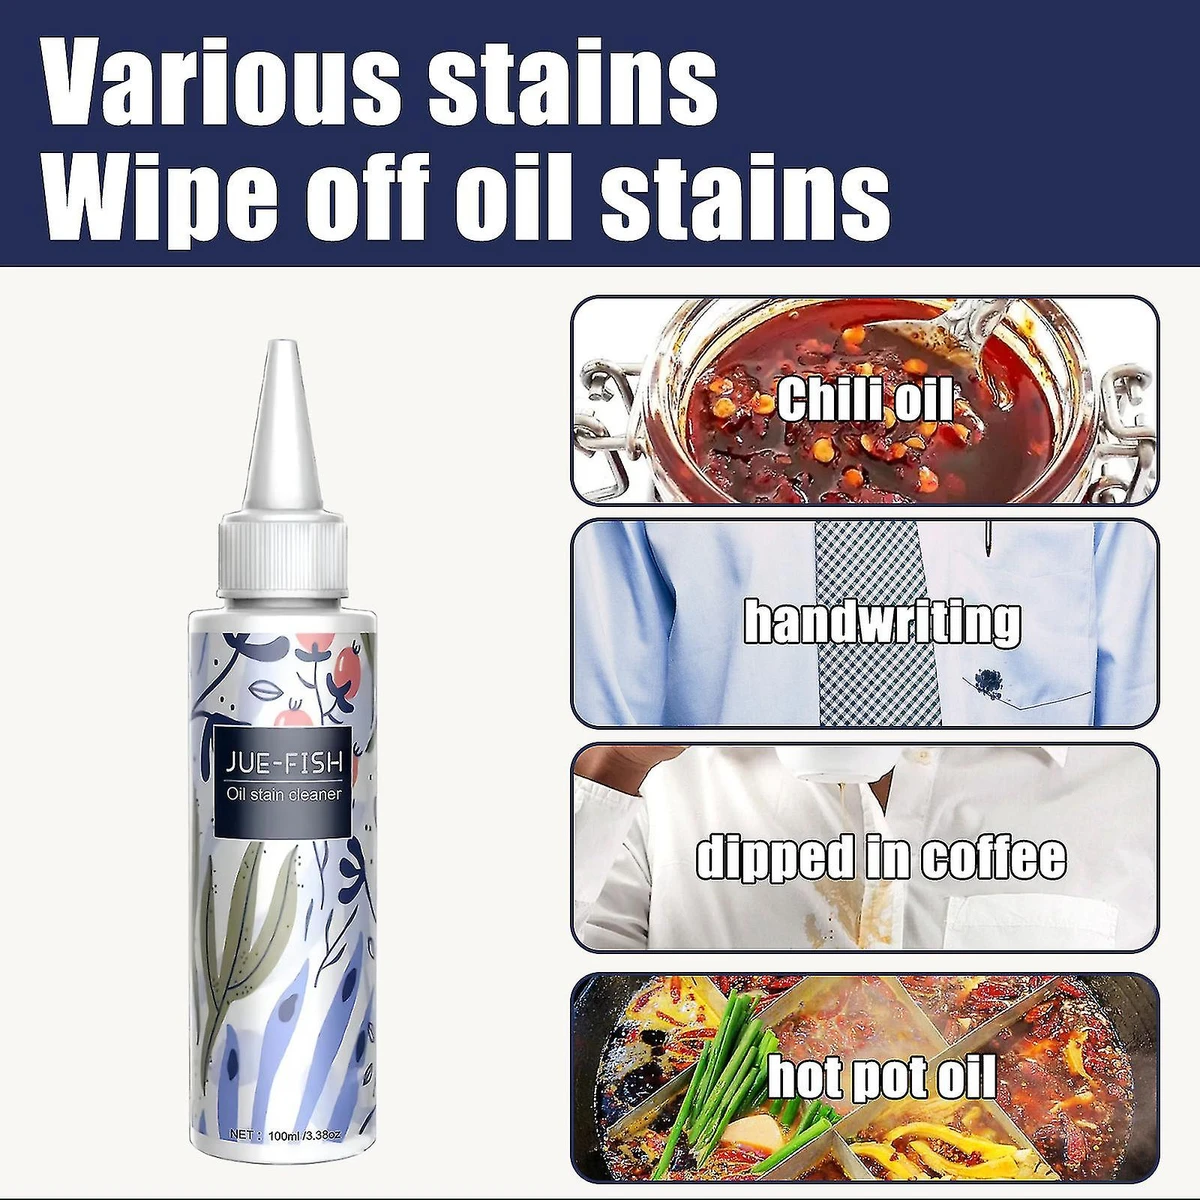 Clothes oil stain remover No harm to clothing